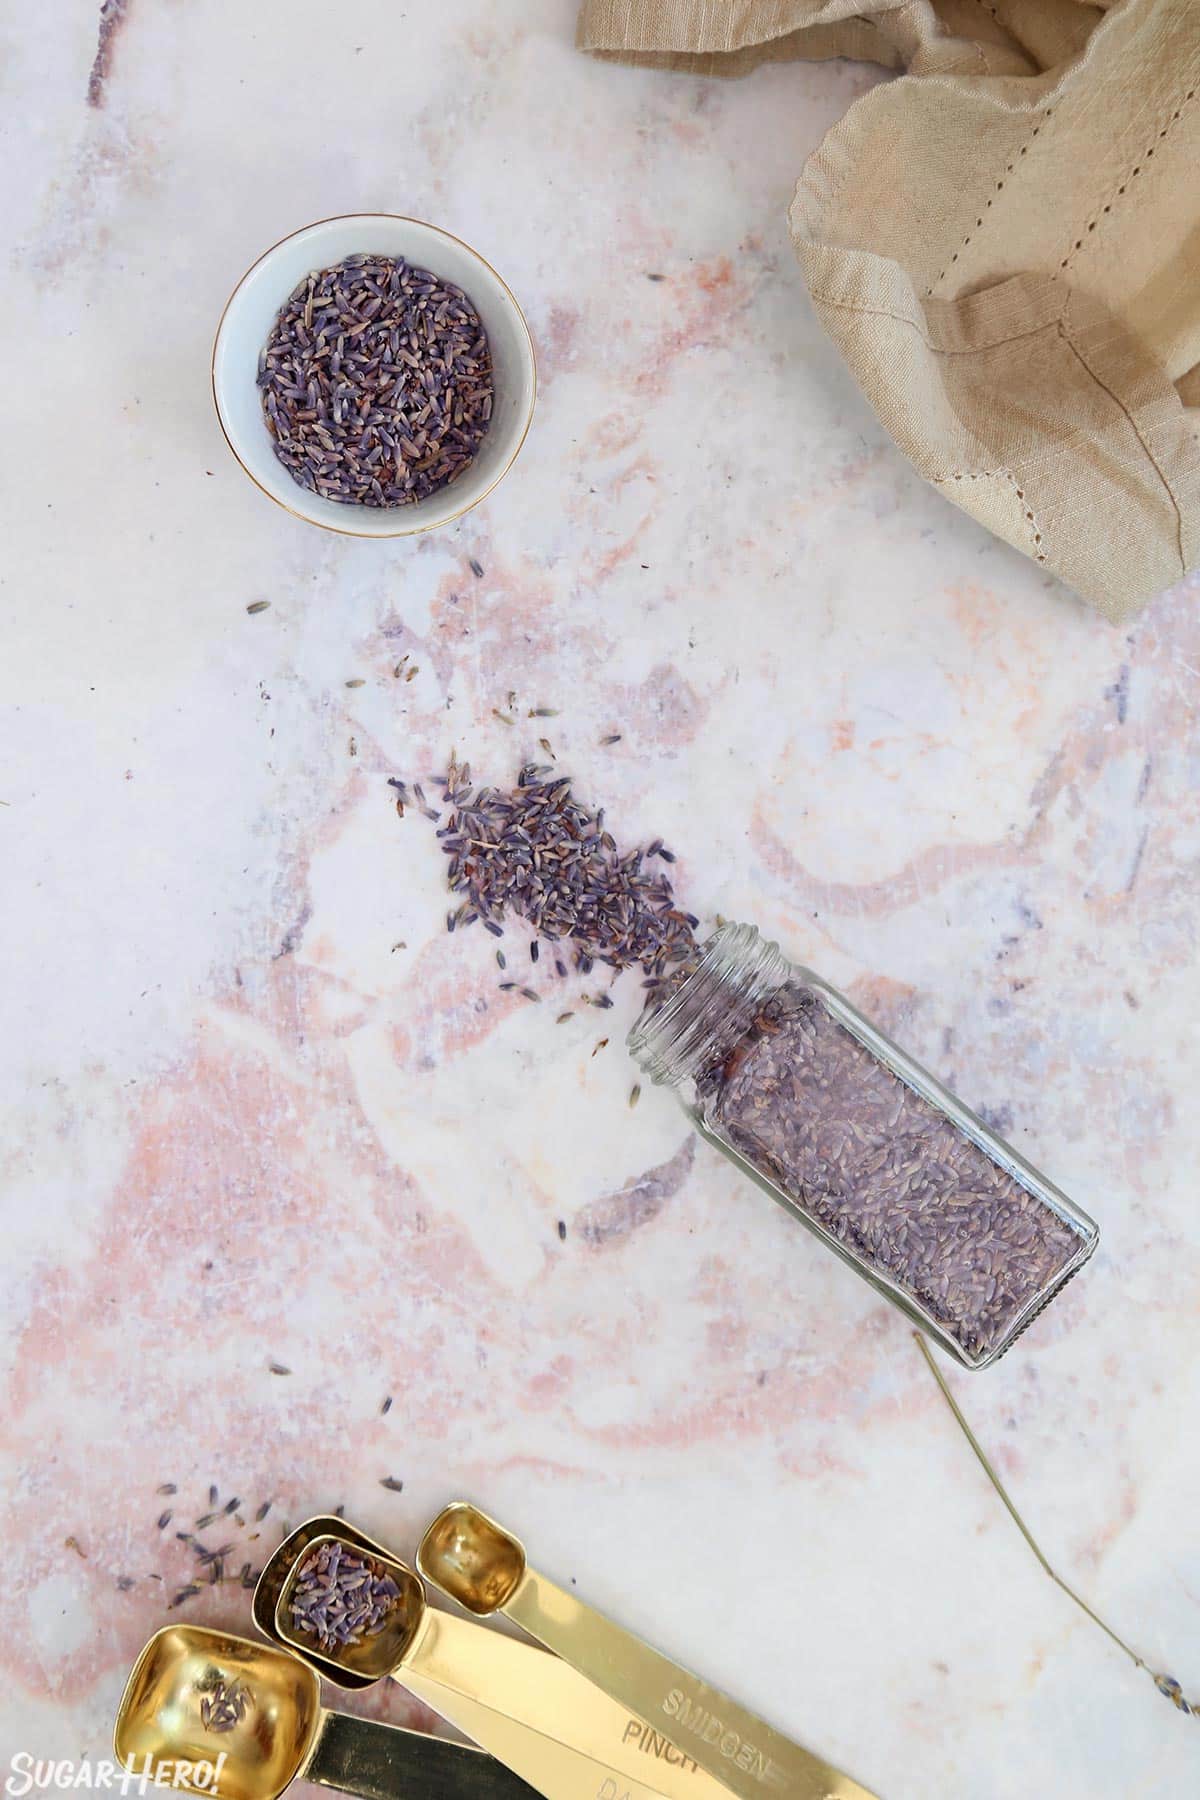 Overhead shot of dried culinary lavender in a small bowl and spilling out of a glass spice jar.